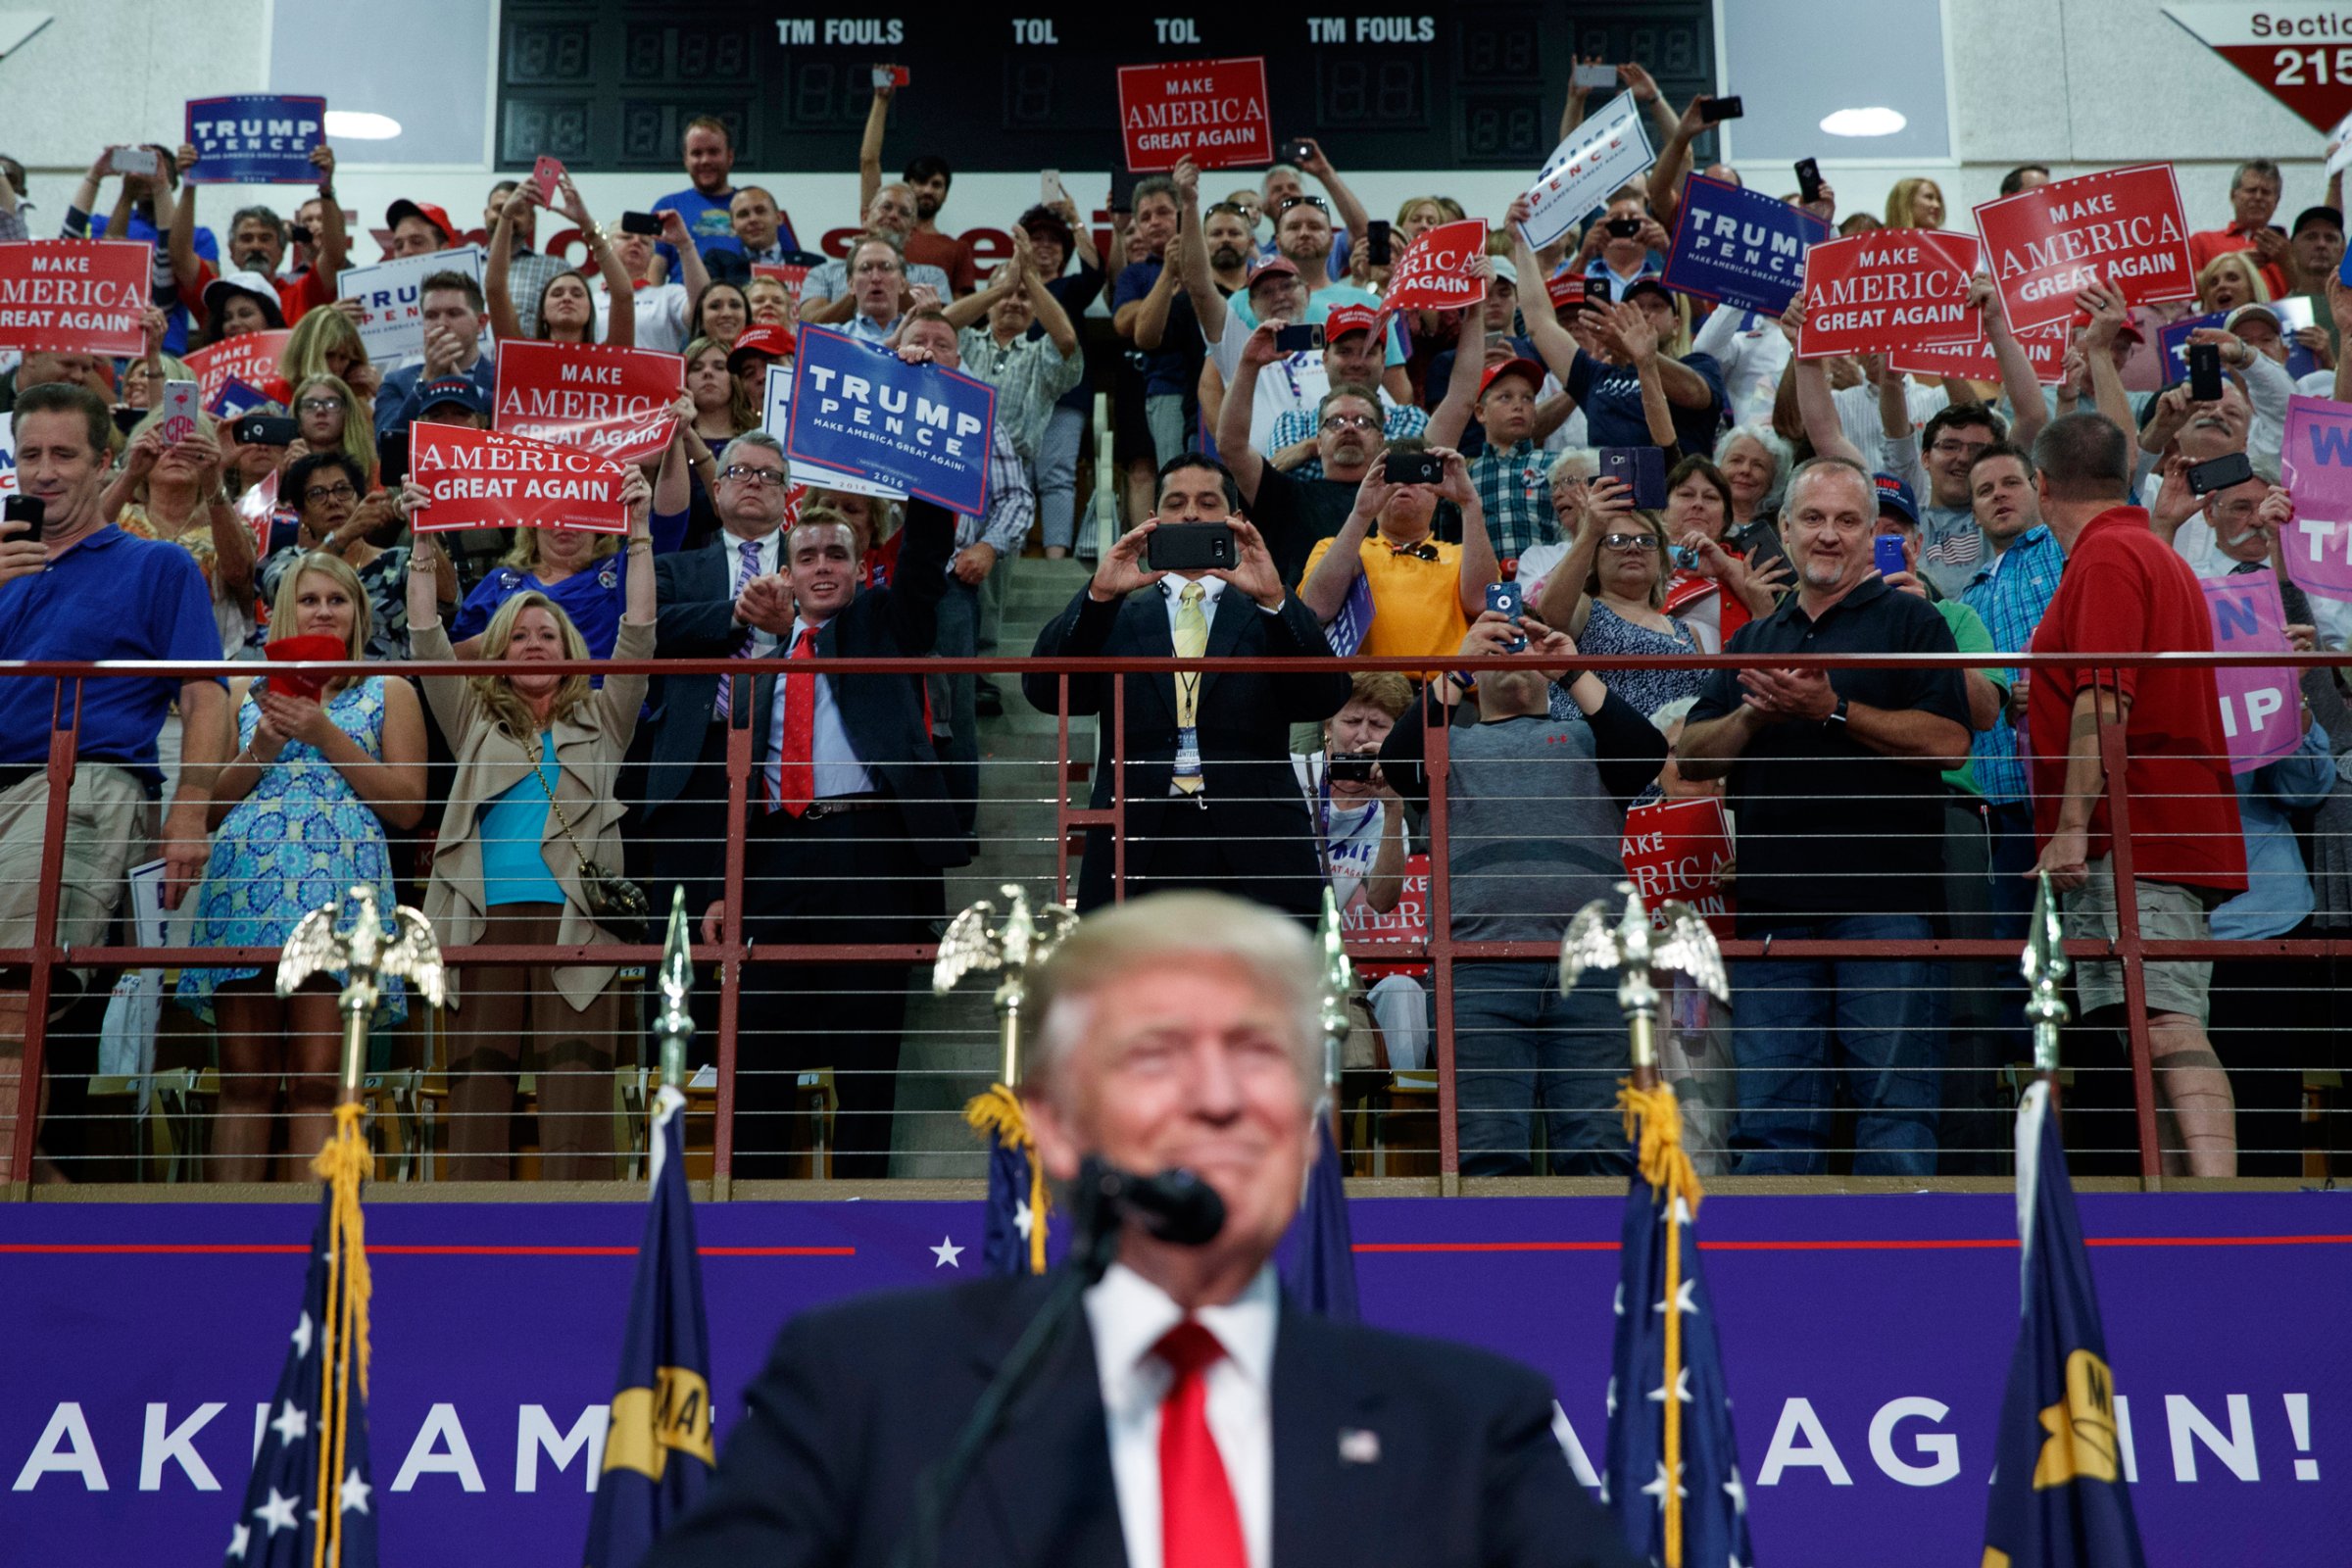 Supporters of Republican presidential candidate Donald Trump cheer as he speaks during a rally, Monday, Sept. 12, 2016, in Asheville, N.C. (AP Photo/Evan Vucci)